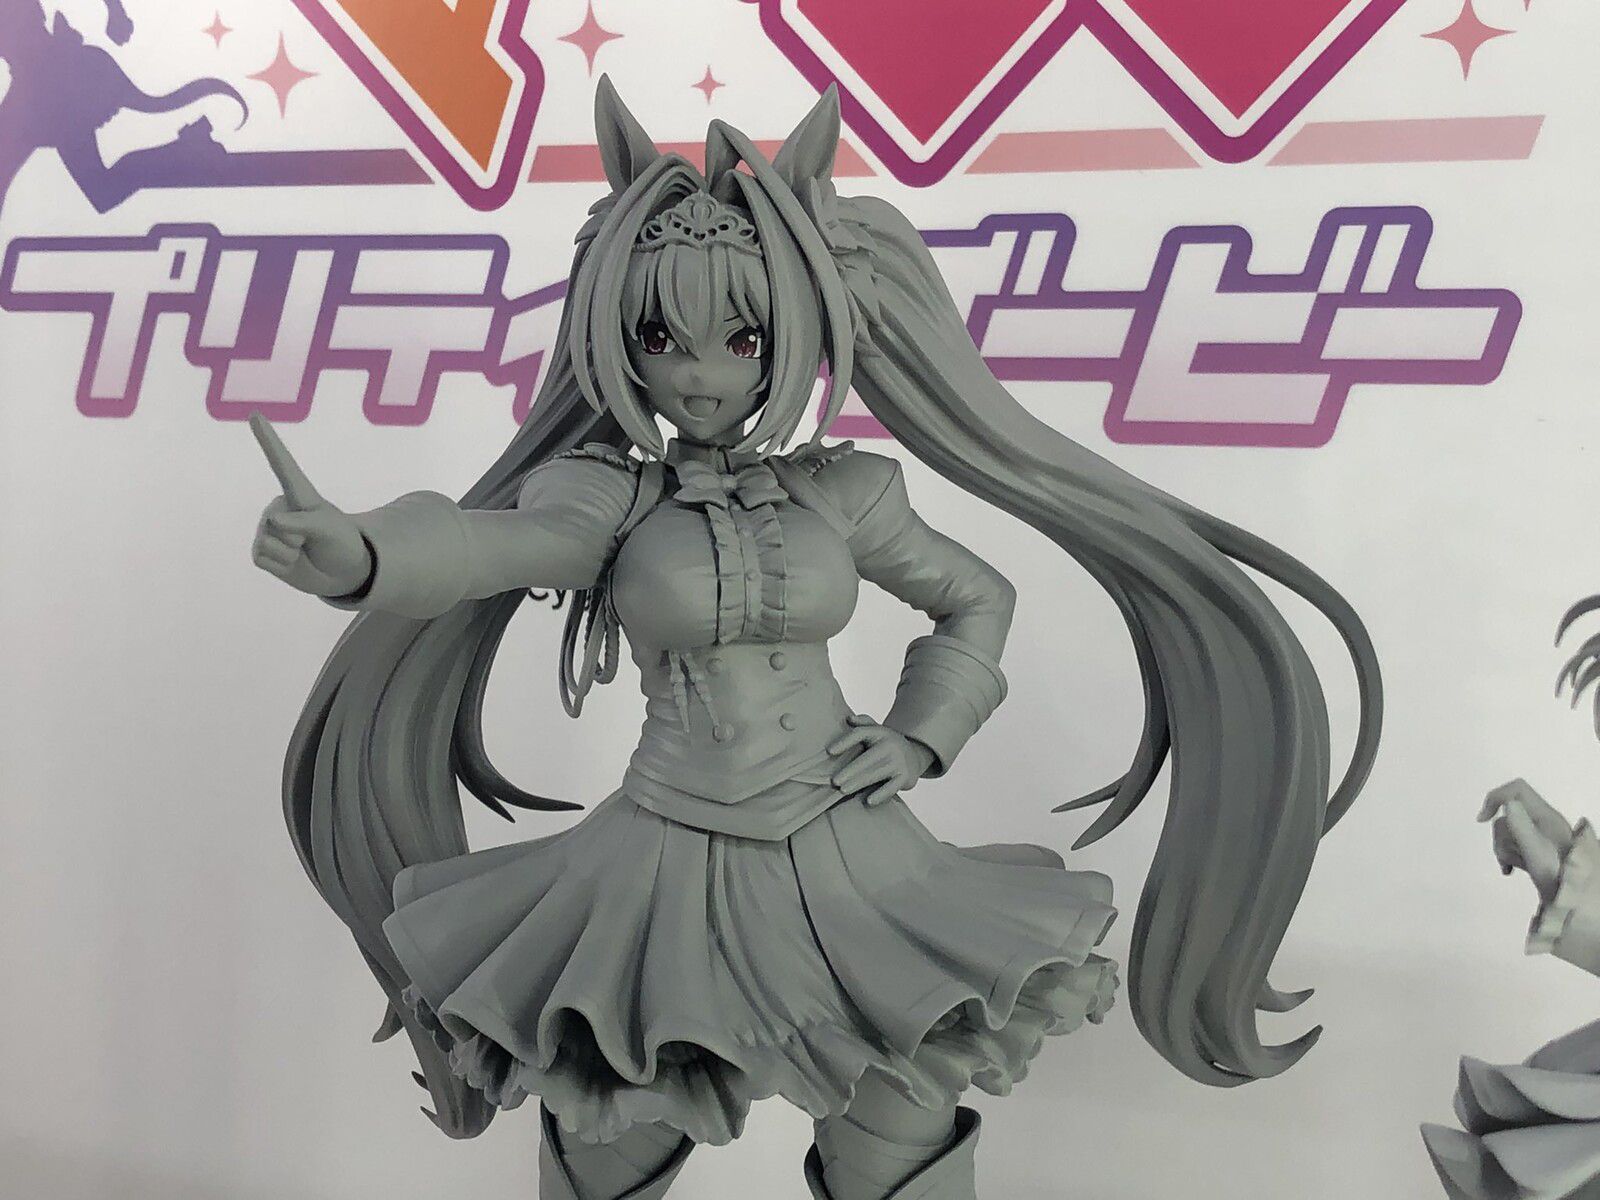 When I look at the prototype of the figure of [Uma Musume] Daiwa Scarlet from below, the thighs and spats are too erotic 9